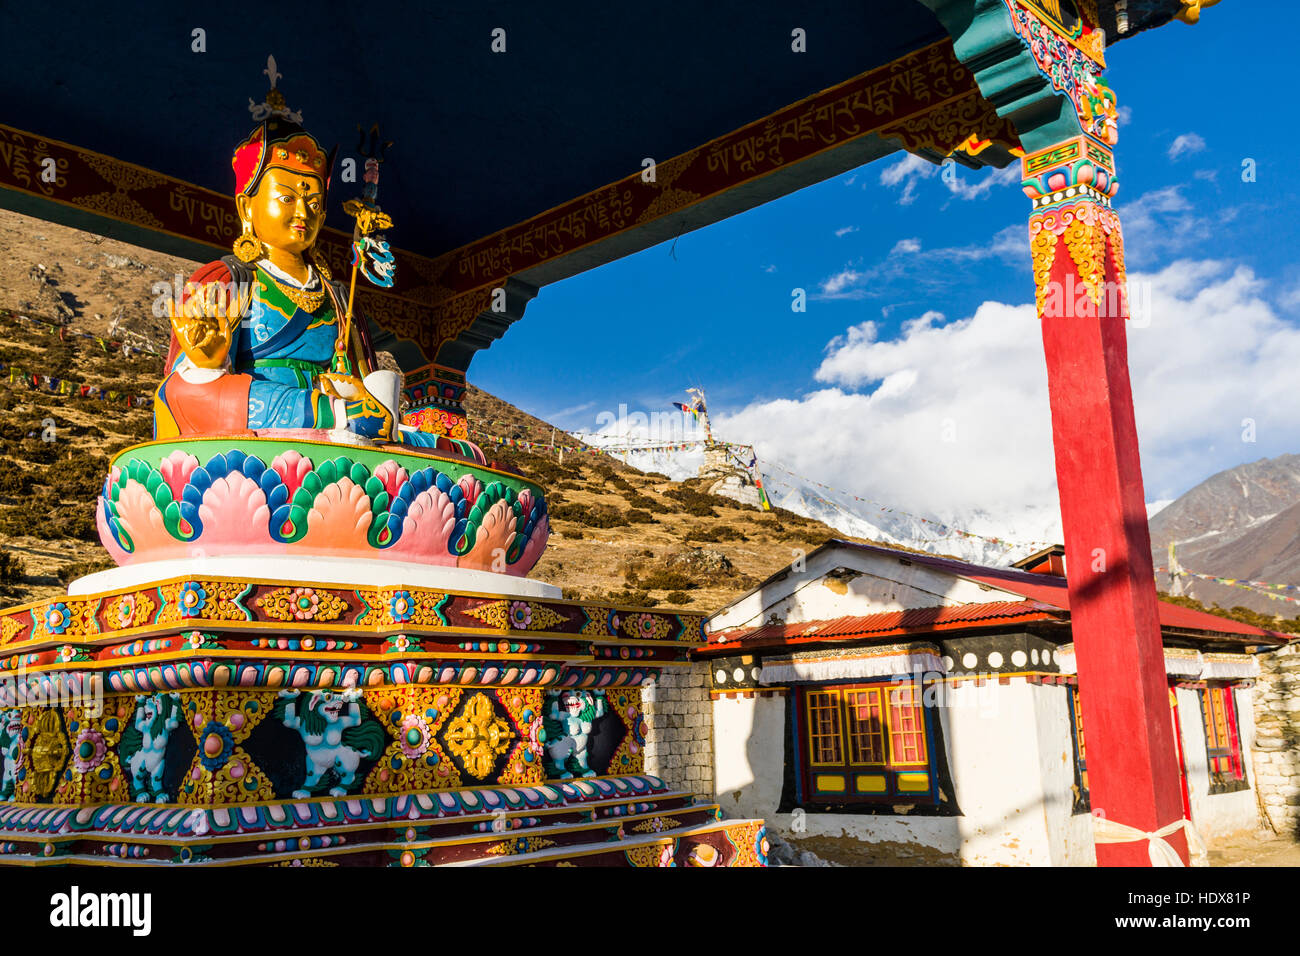 The colorful statue of Padmasambhava is erected on the slope of a hill Stock Photo